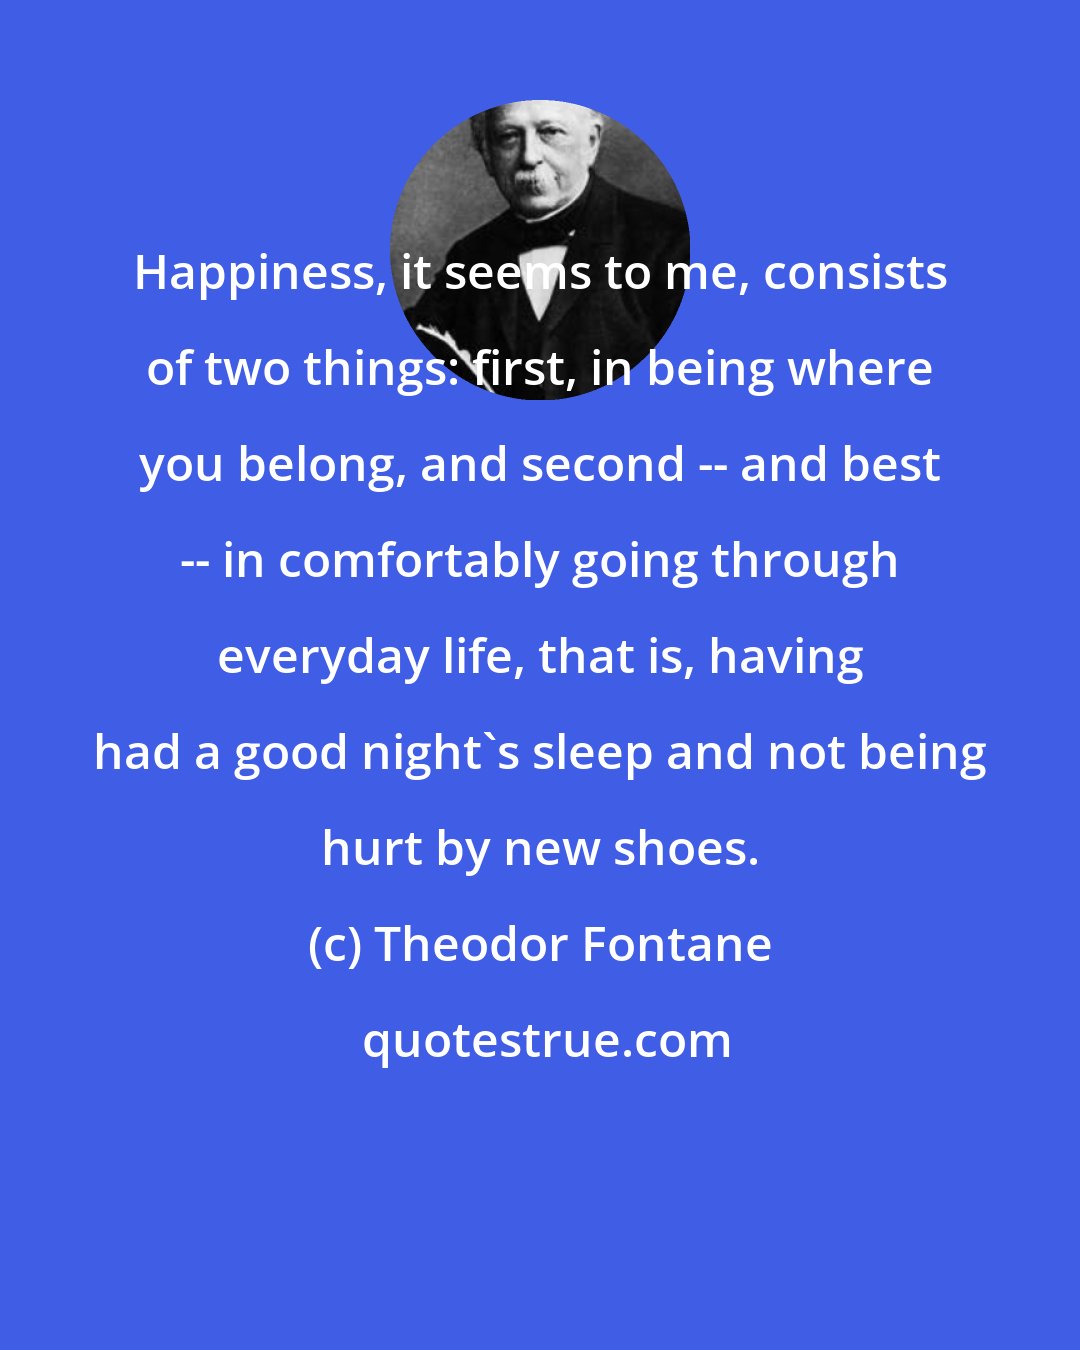 Theodor Fontane: Happiness, it seems to me, consists of two things: first, in being where you belong, and second -- and best -- in comfortably going through everyday life, that is, having had a good night's sleep and not being hurt by new shoes.